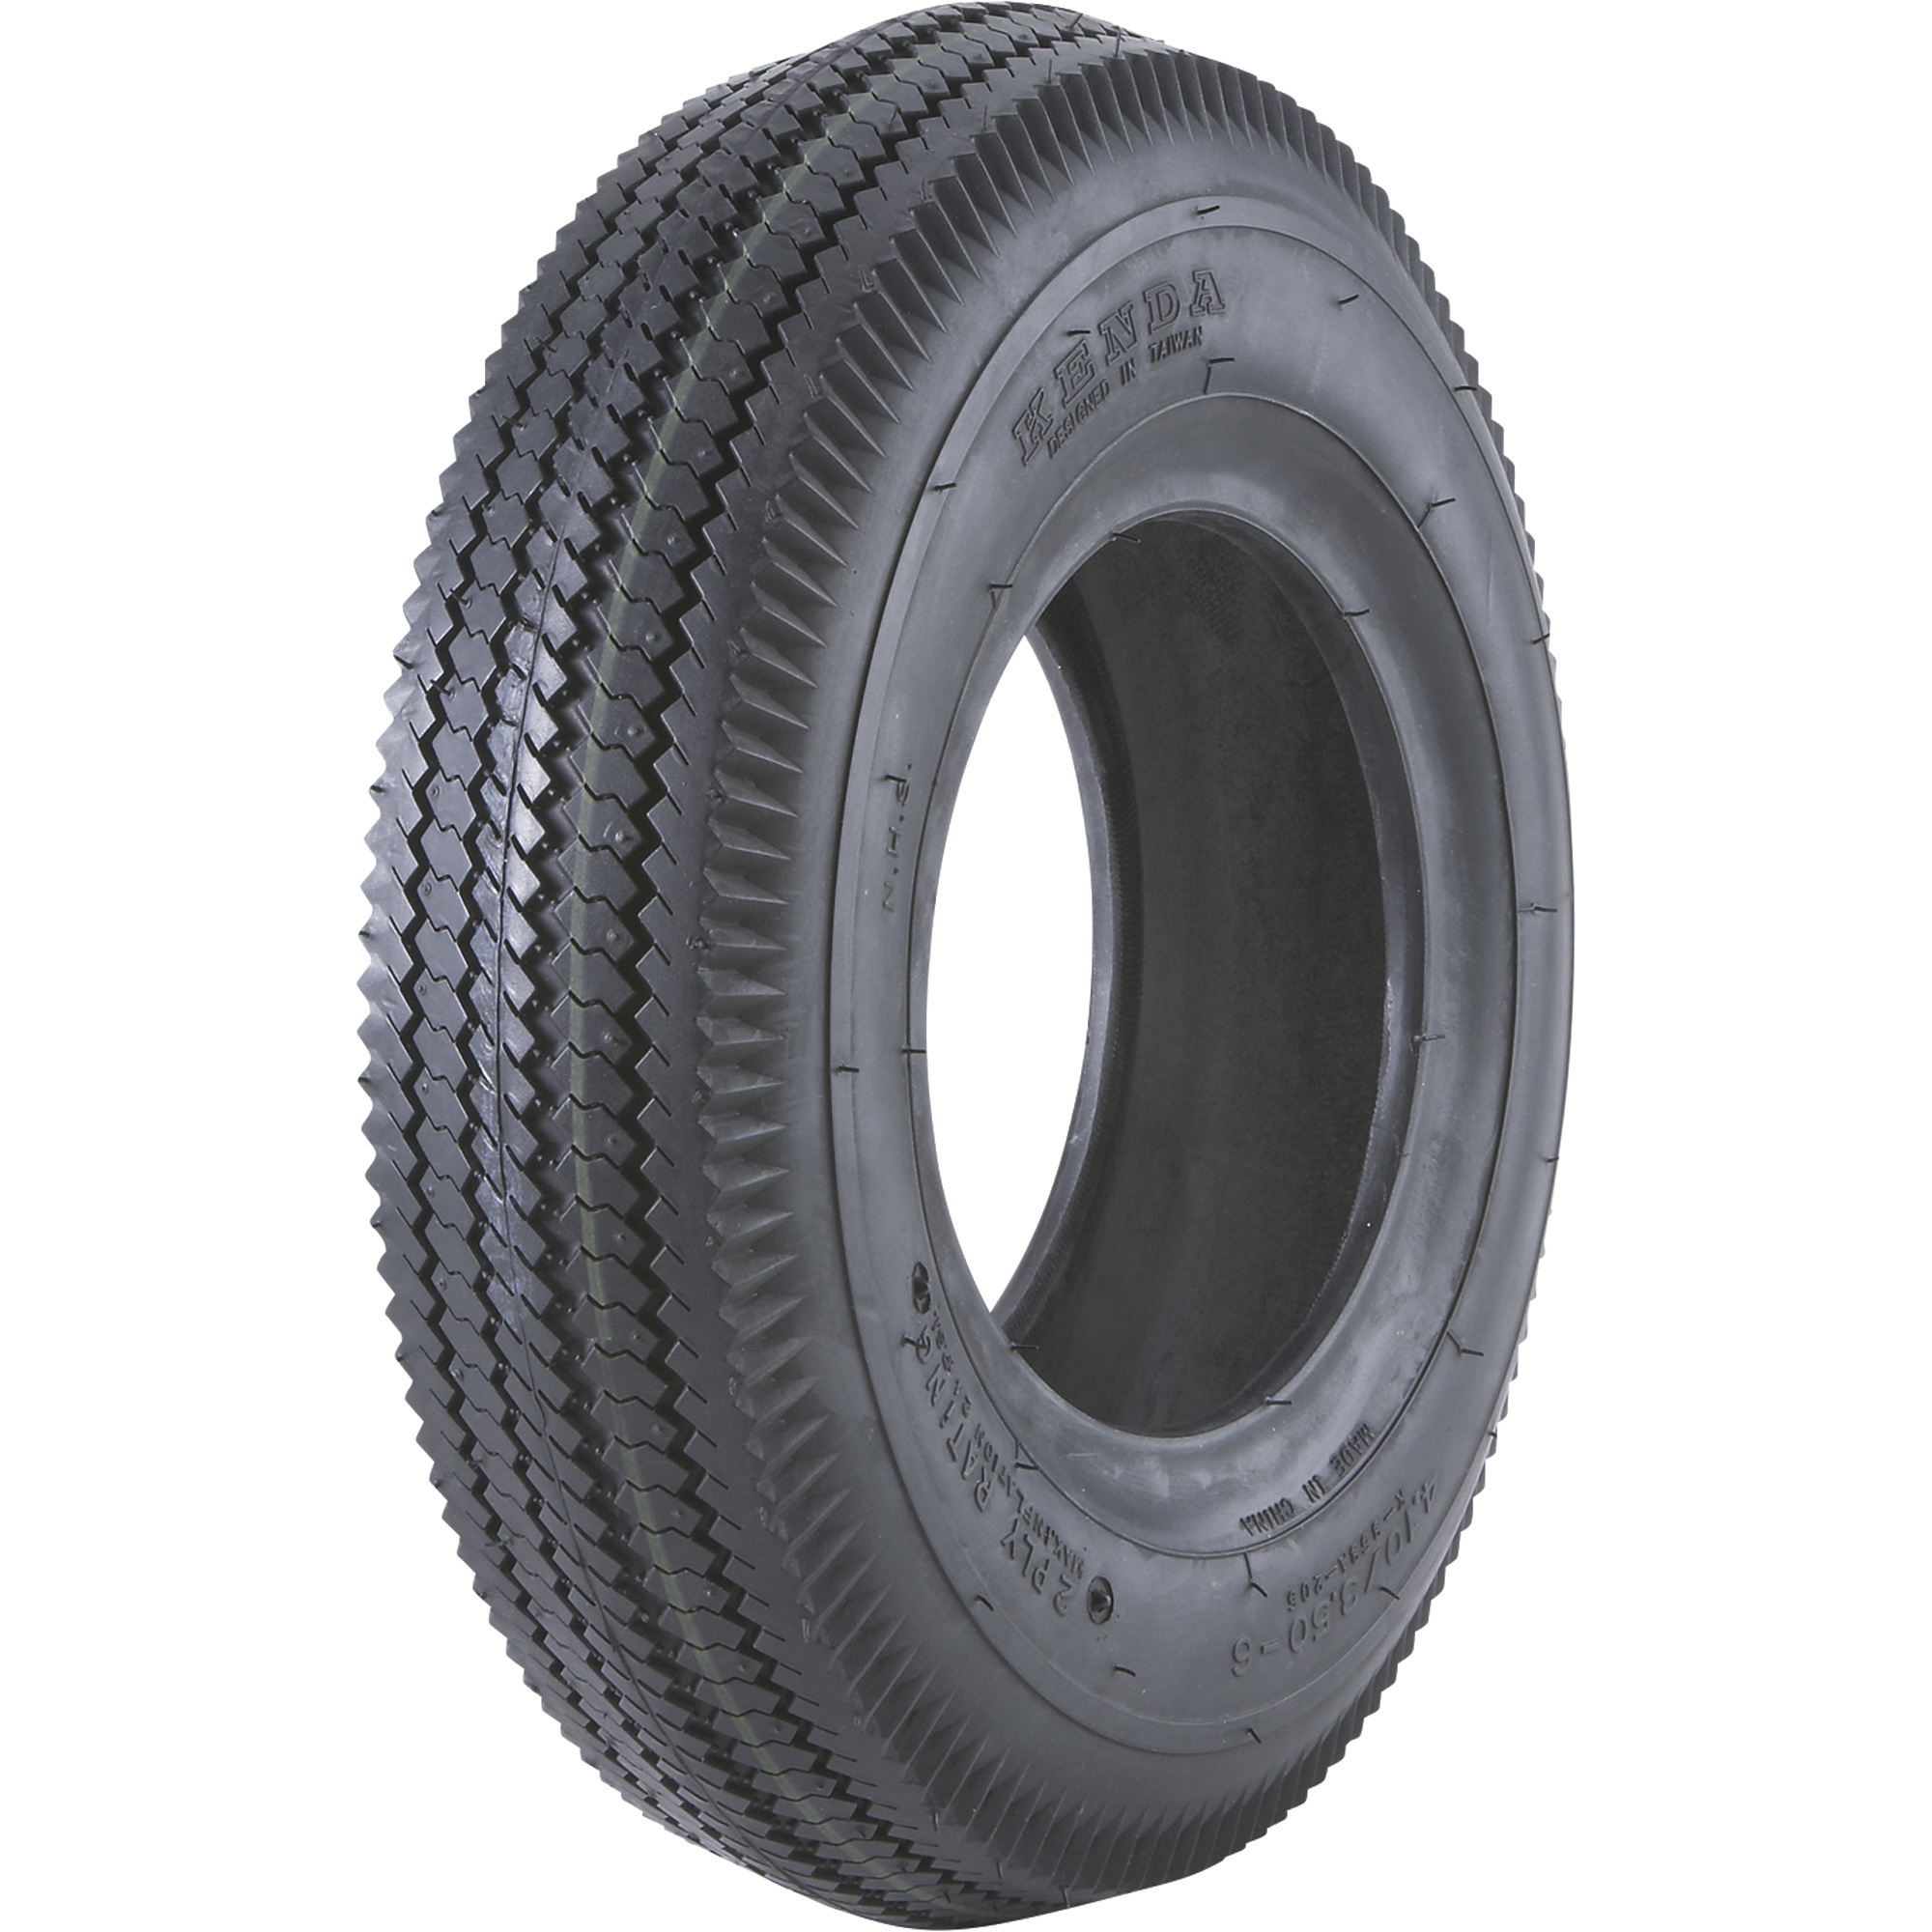 2-Ply Sawtooth Tread Replacement Tubeless Tire for Pneumatic Assemblies â 14.7Inch x 530/450 x 6